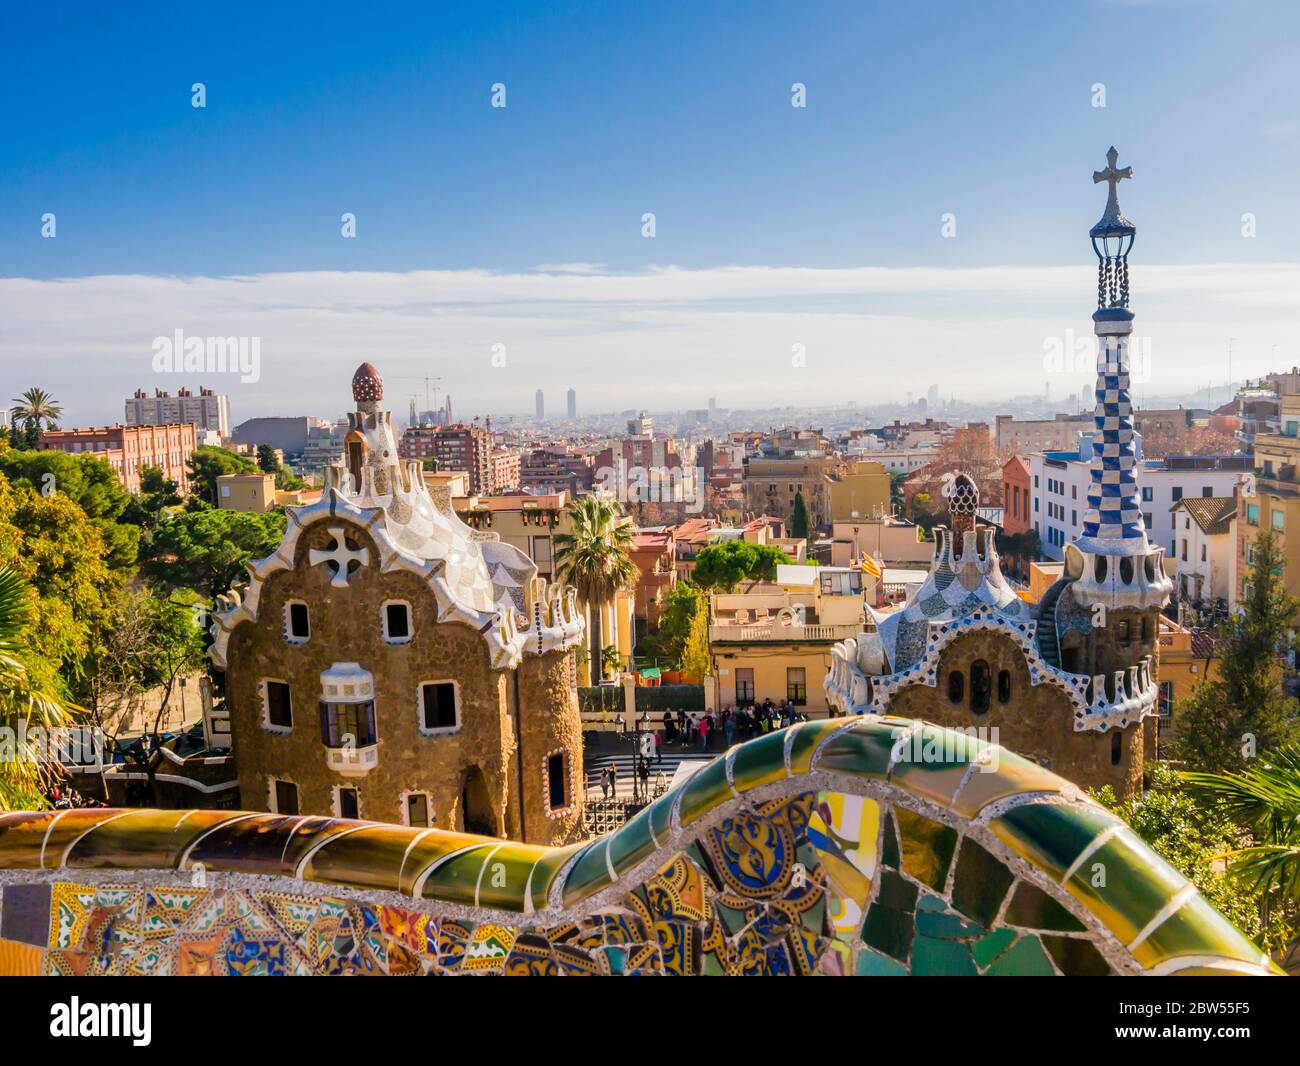 Impressive view of colorful Park Güell architectures designed by Antoni Gaudì, Barcelona, Spain Stock Photo